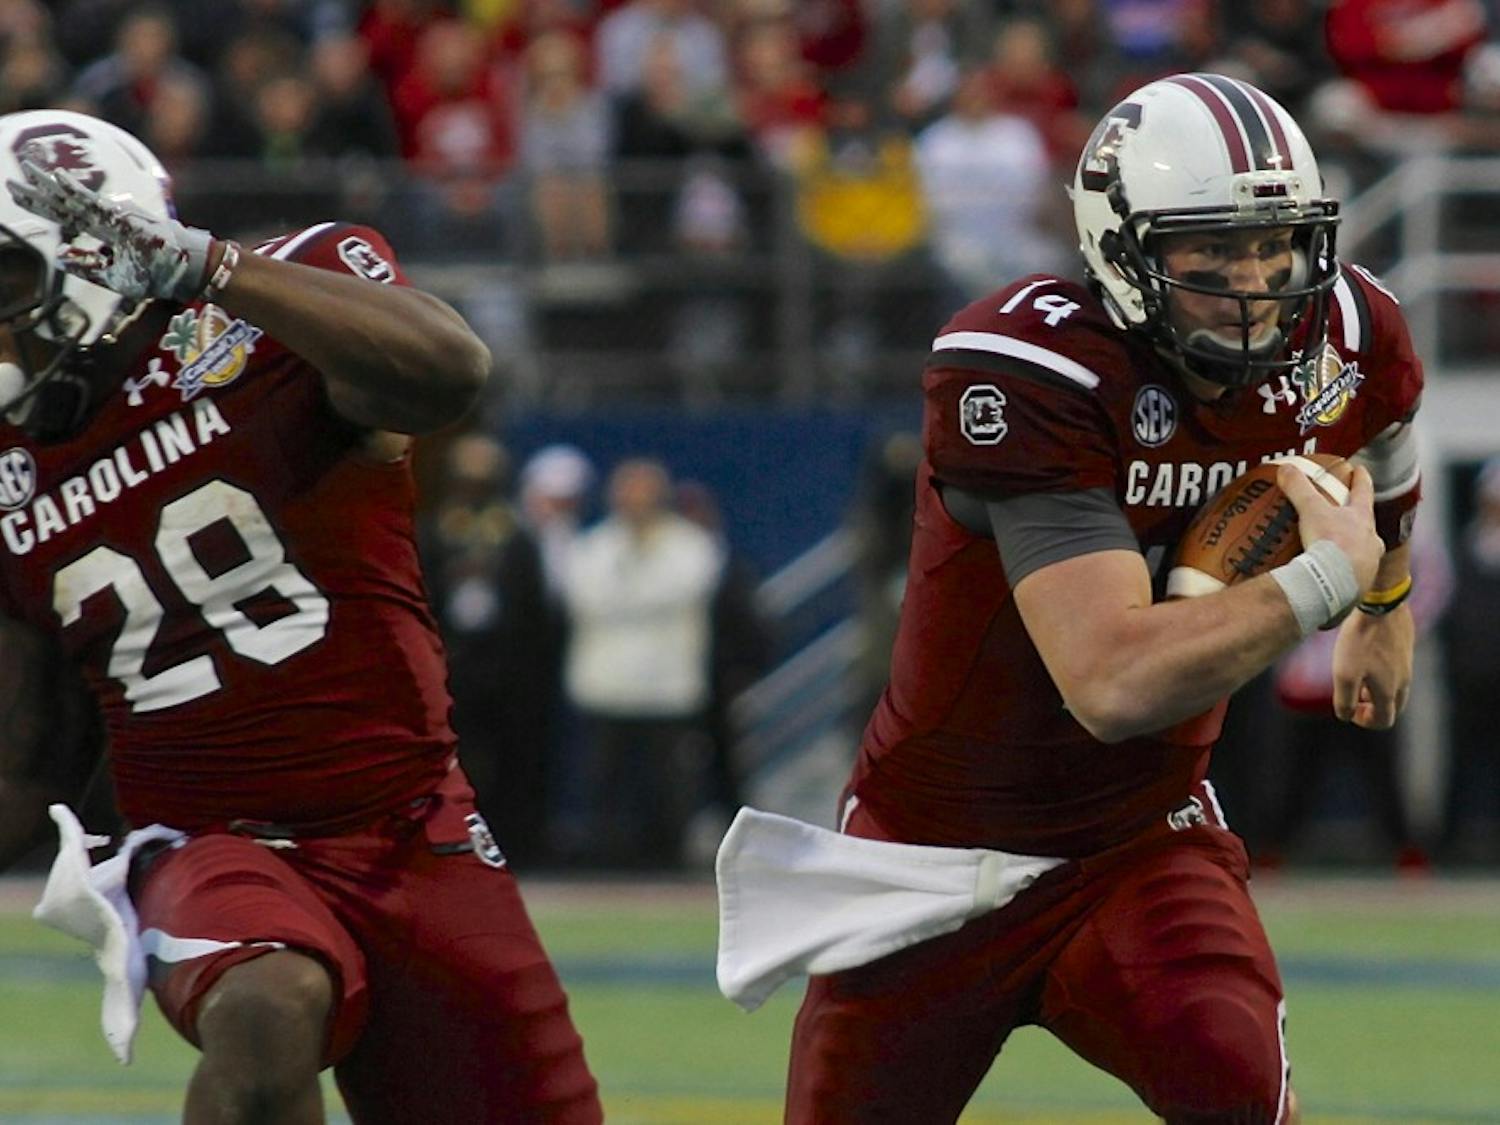 	Quarterback Connor Shaw ran 16 times for 47 yards and one touchdown at the Capital One Bowl on Jan. 1. He also had four touchdowns through the air, three passing and one receiving.